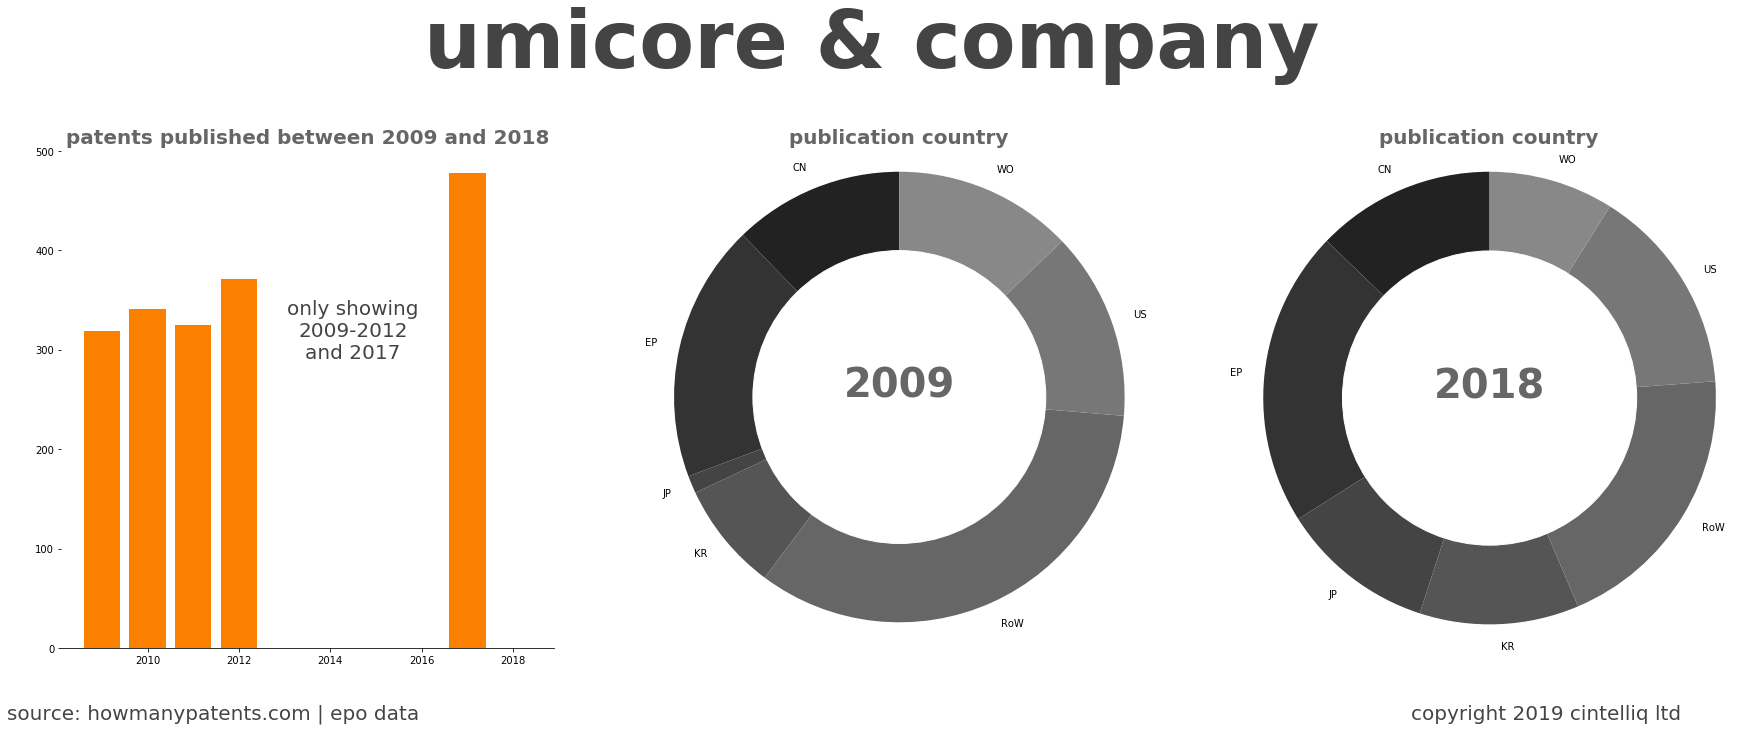 summary of patents for Umicore & Company